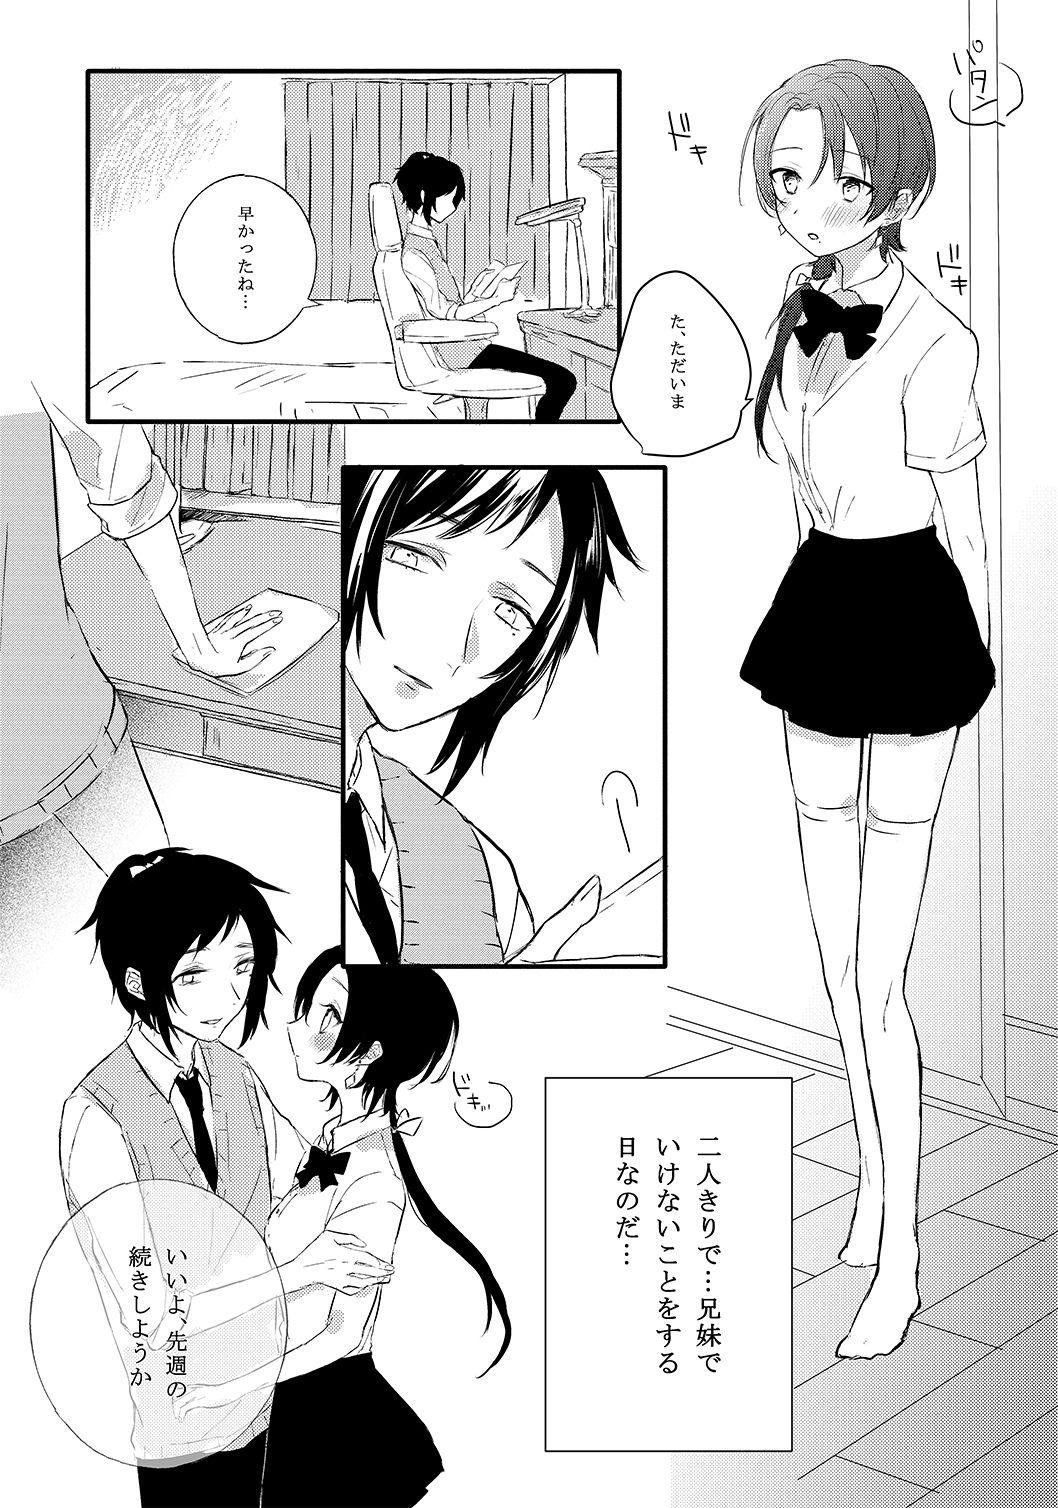 Natural Tits BROTHER COMPLEX + SISTER COMPLEX - Touken ranbu Canadian - Page 4